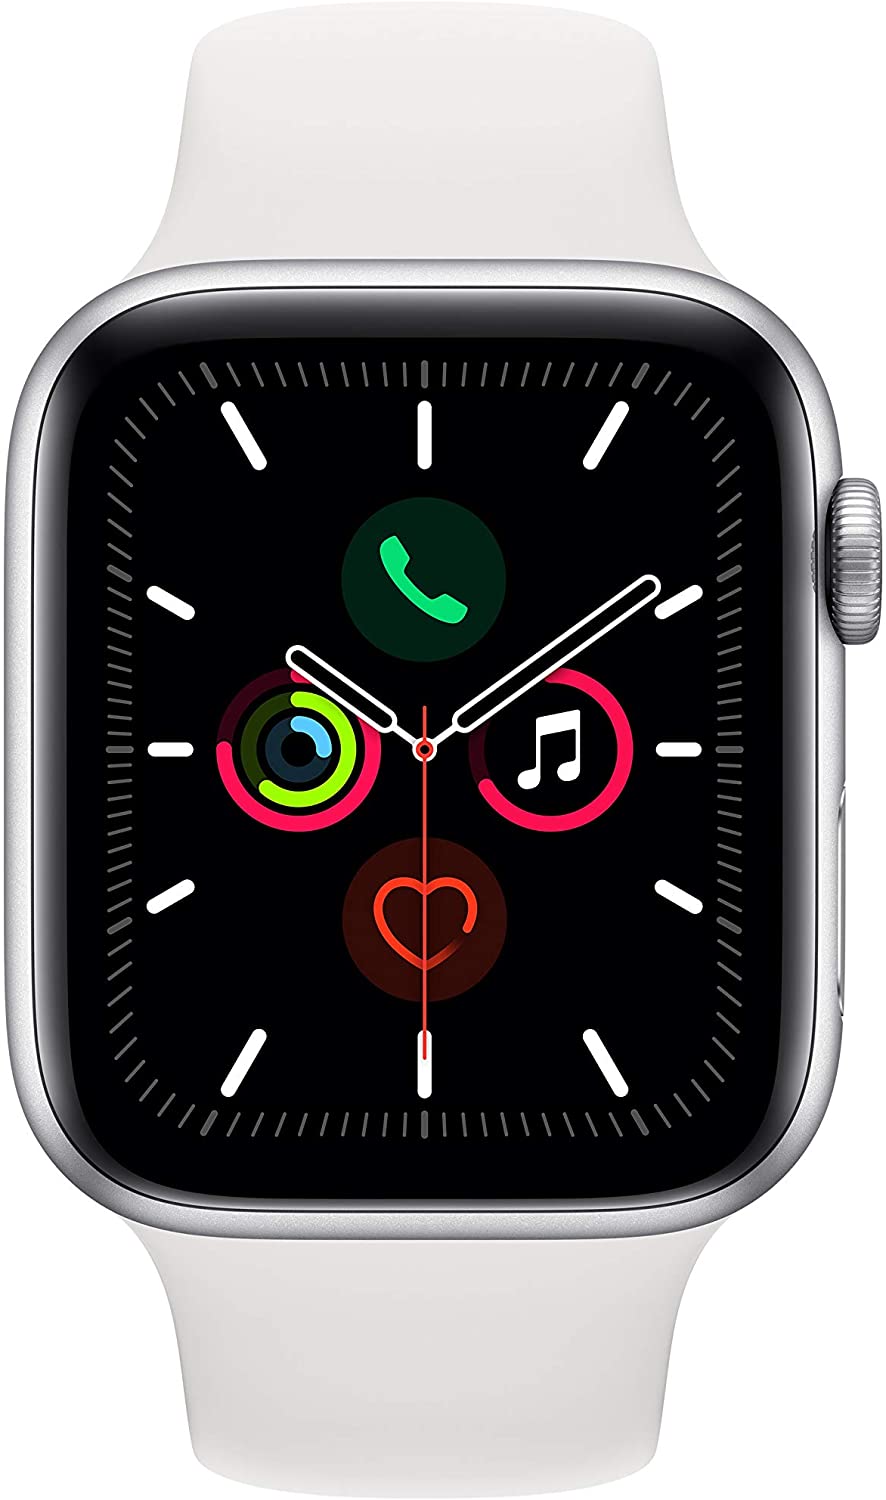 Apple Watch Series 5 Front